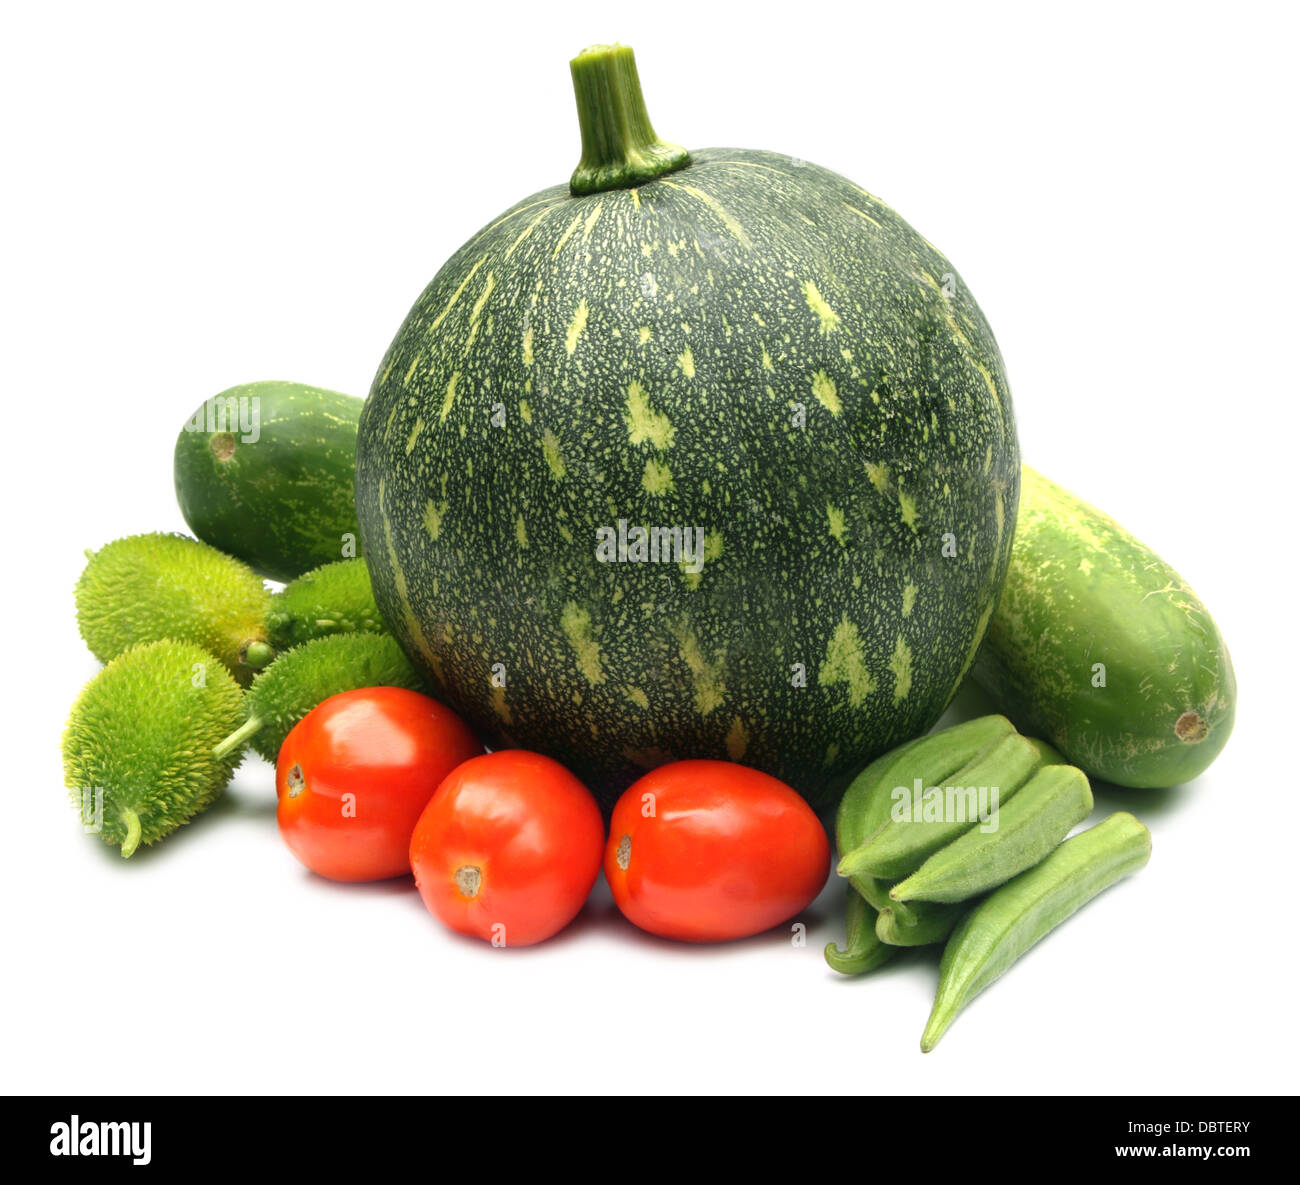 Fresh vegetables – green pumpkin, tomato and okras, kakrol and cucumber Stock Photo